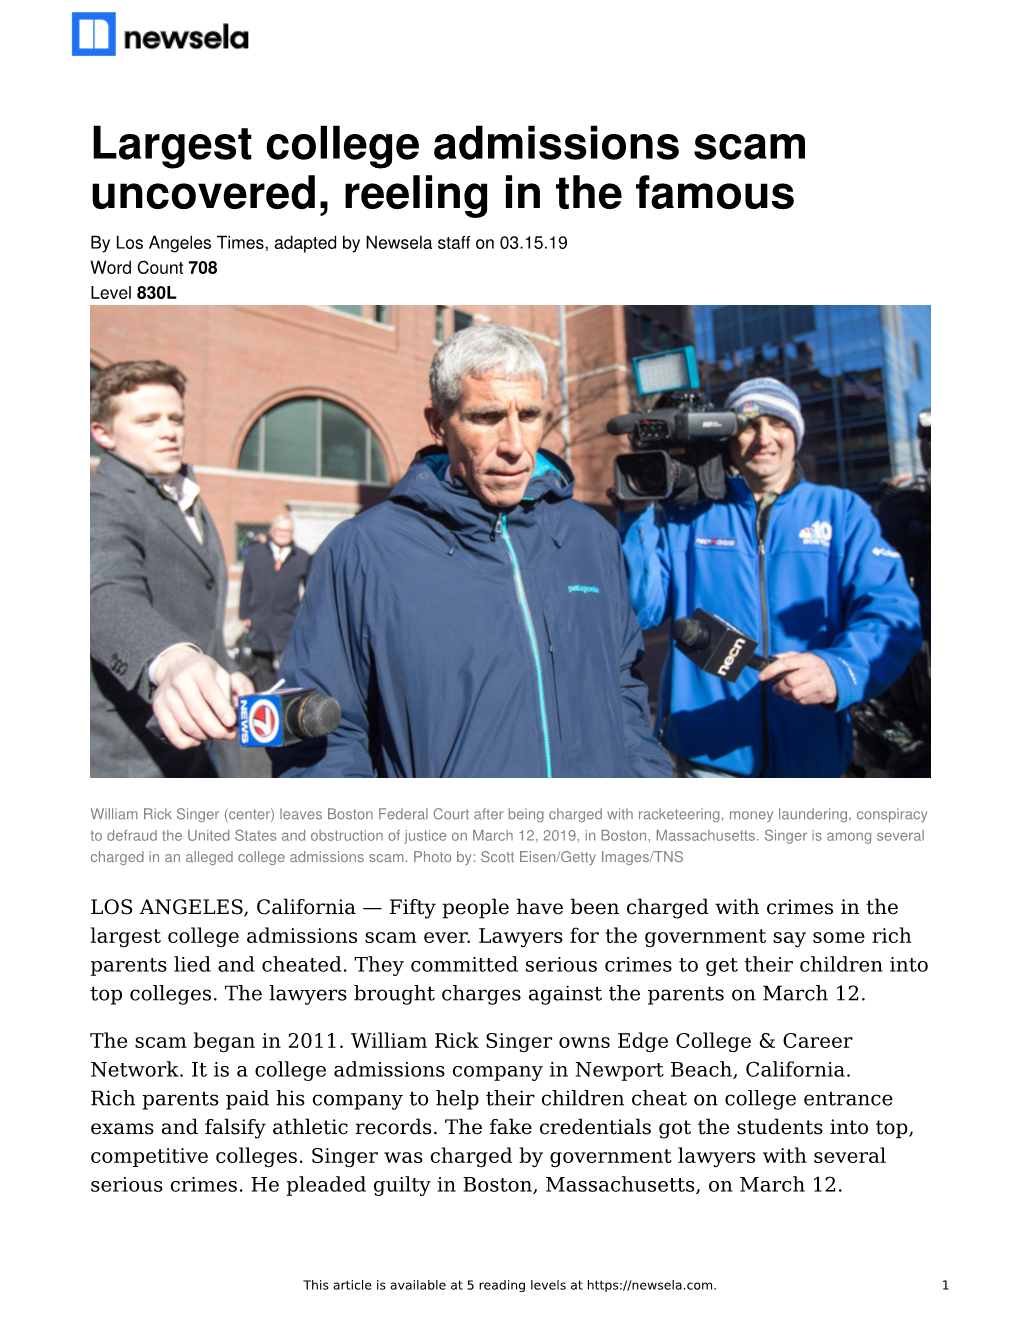 Largest College Admissions Scam Uncovered, Reeling in the Famous by Los Angeles Times, Adapted by Newsela Staff on 03.15.19 Word Count 708 Level 830L